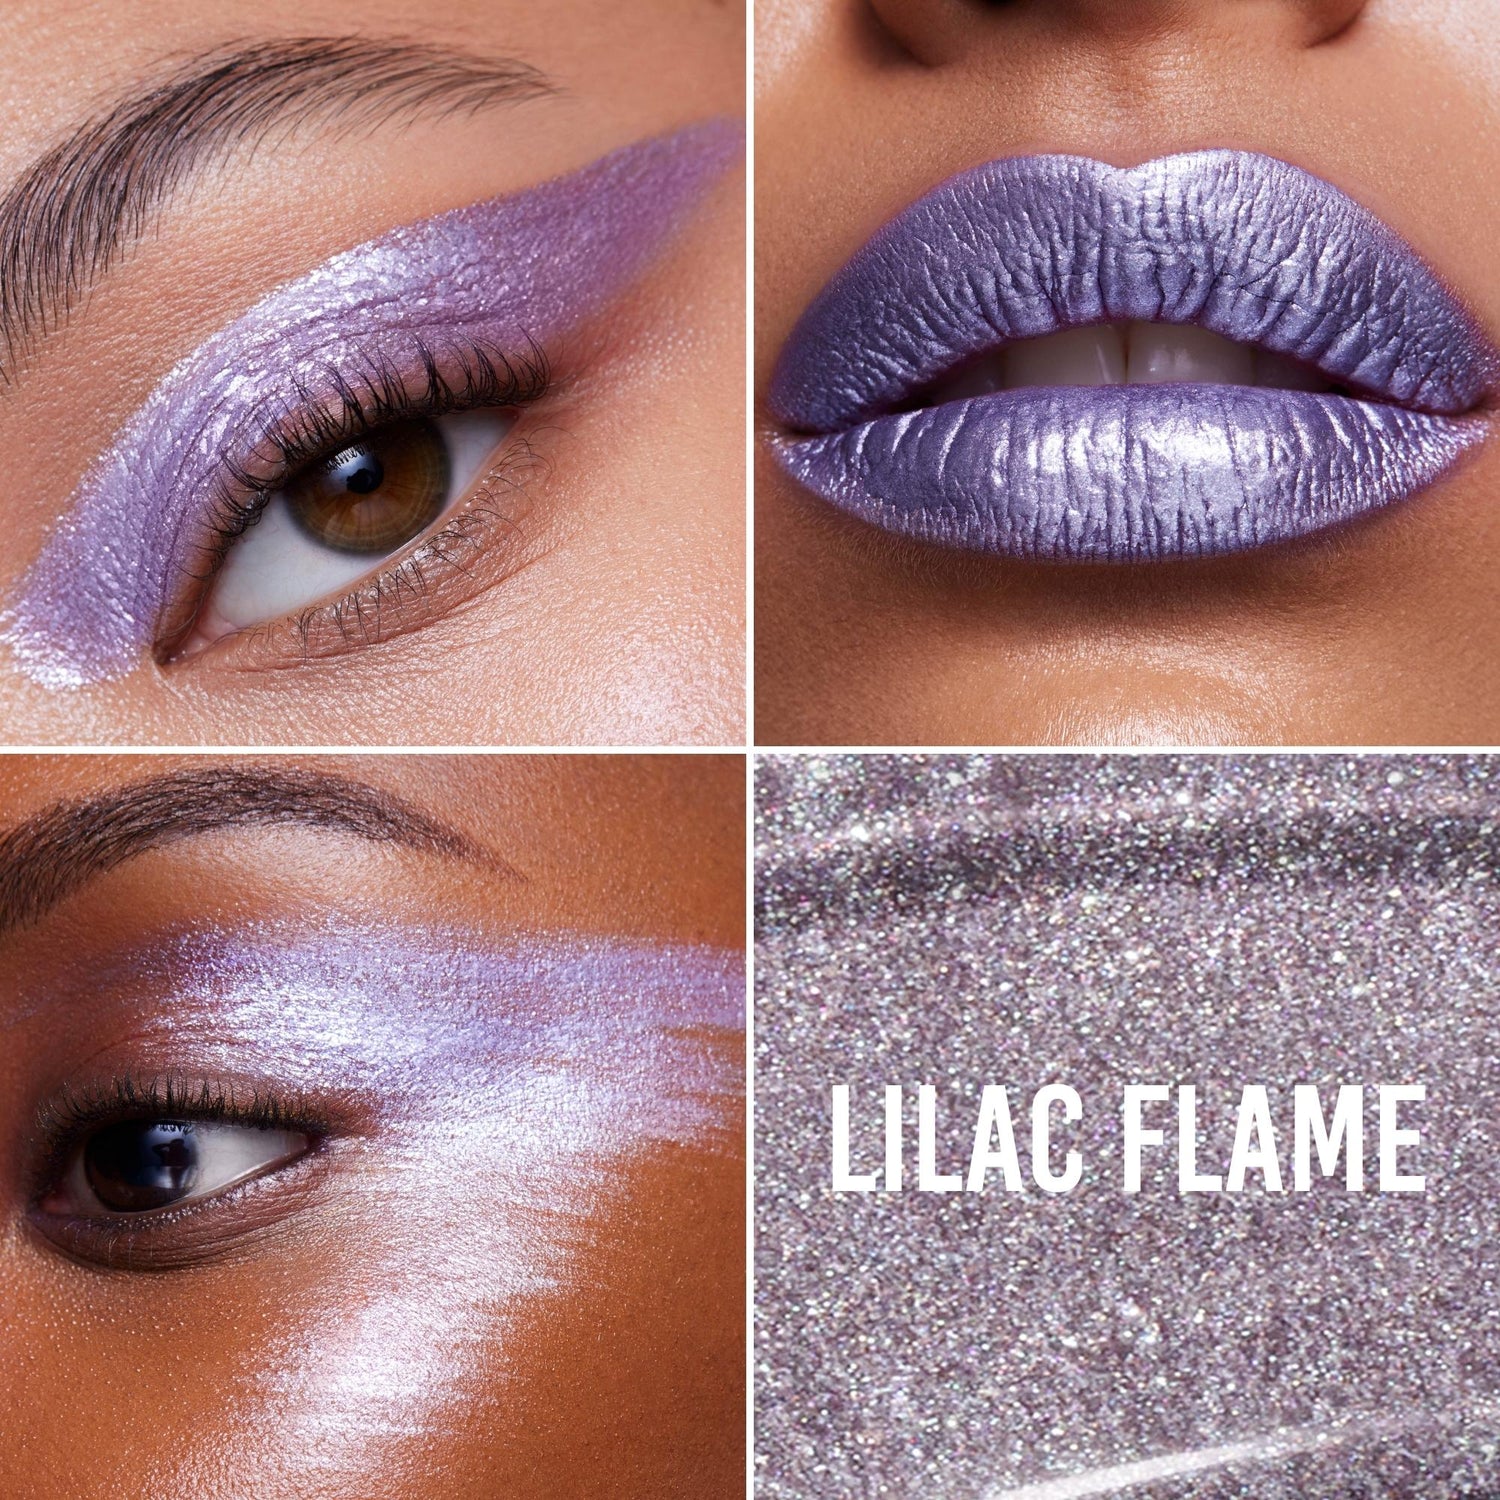 lilac flame